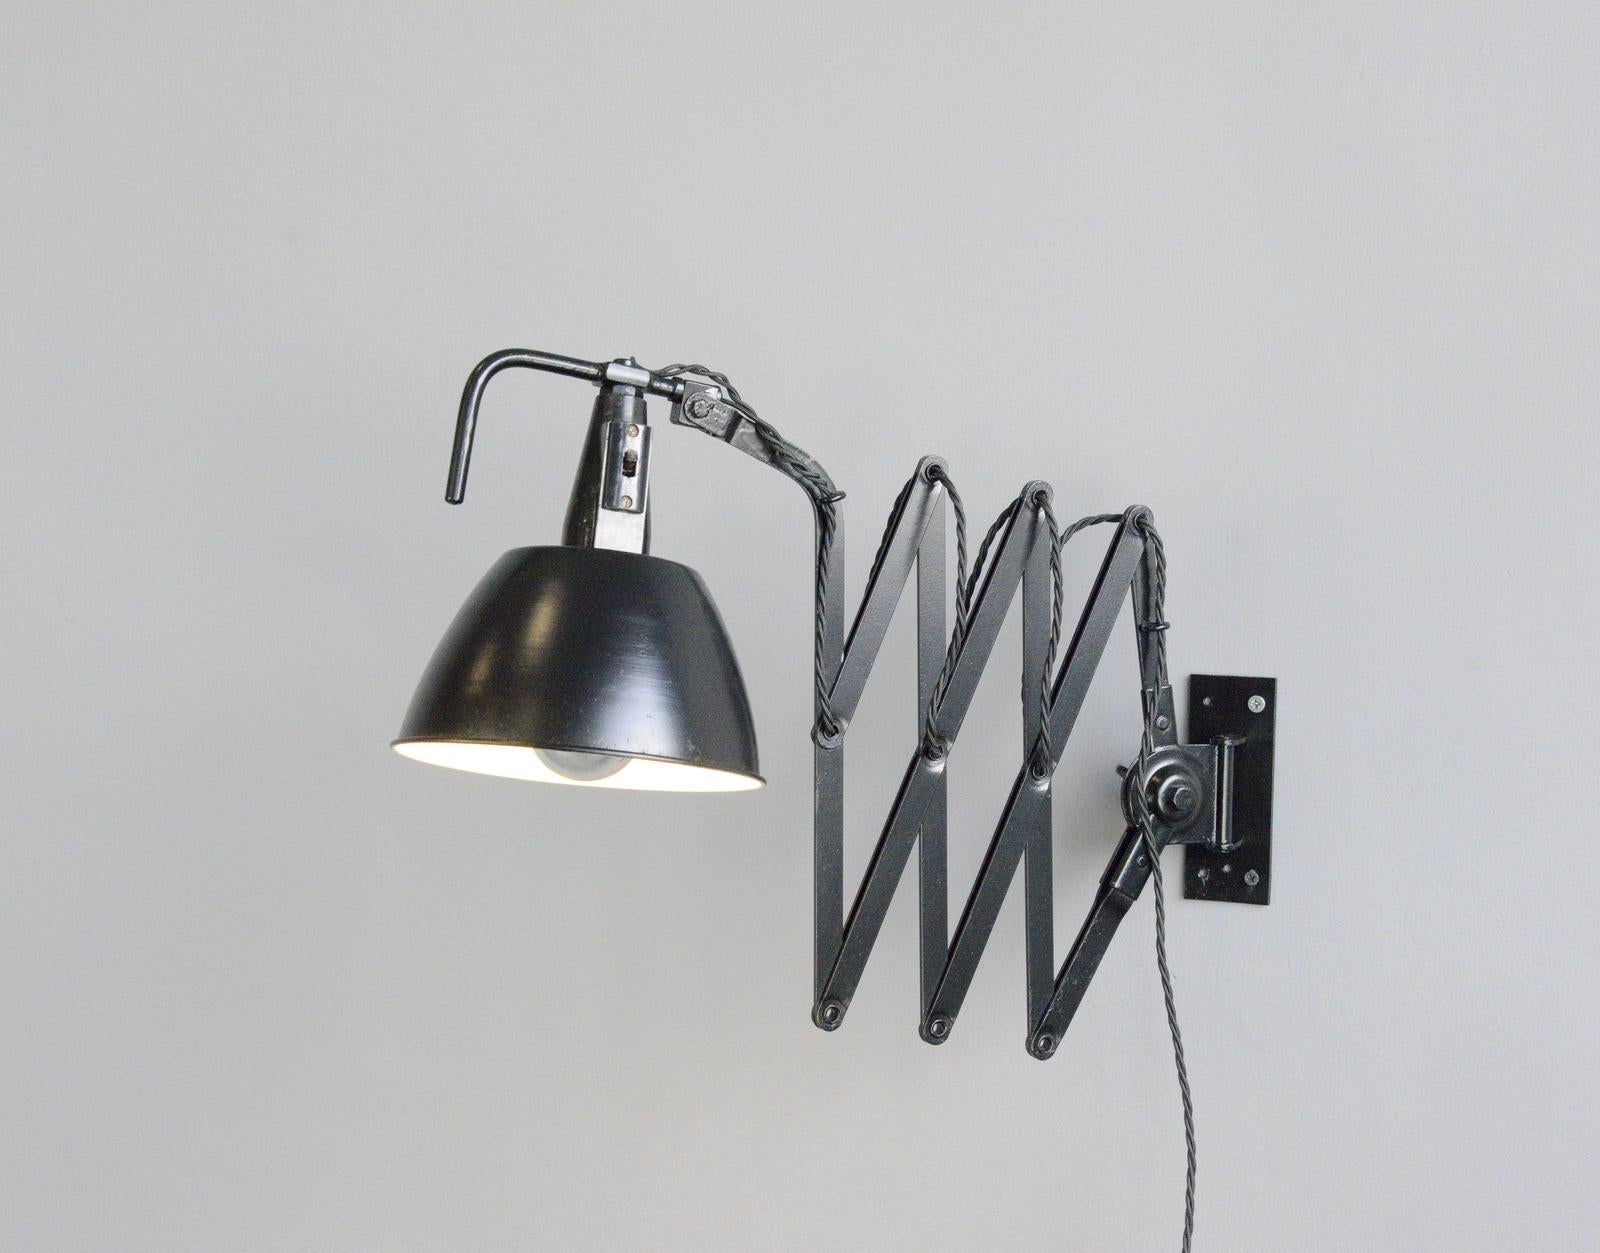 Modernist scissor lamp by Wilhelm Bader Circa 1930s

- Large extendable scissor mechanism 
- Steel shade
- Original On/Off switch on the shade
- Takes E27 fitting bulbs
- German ~ 1930s
- Extends up to 130cm from the wall
- Measures: 18cm